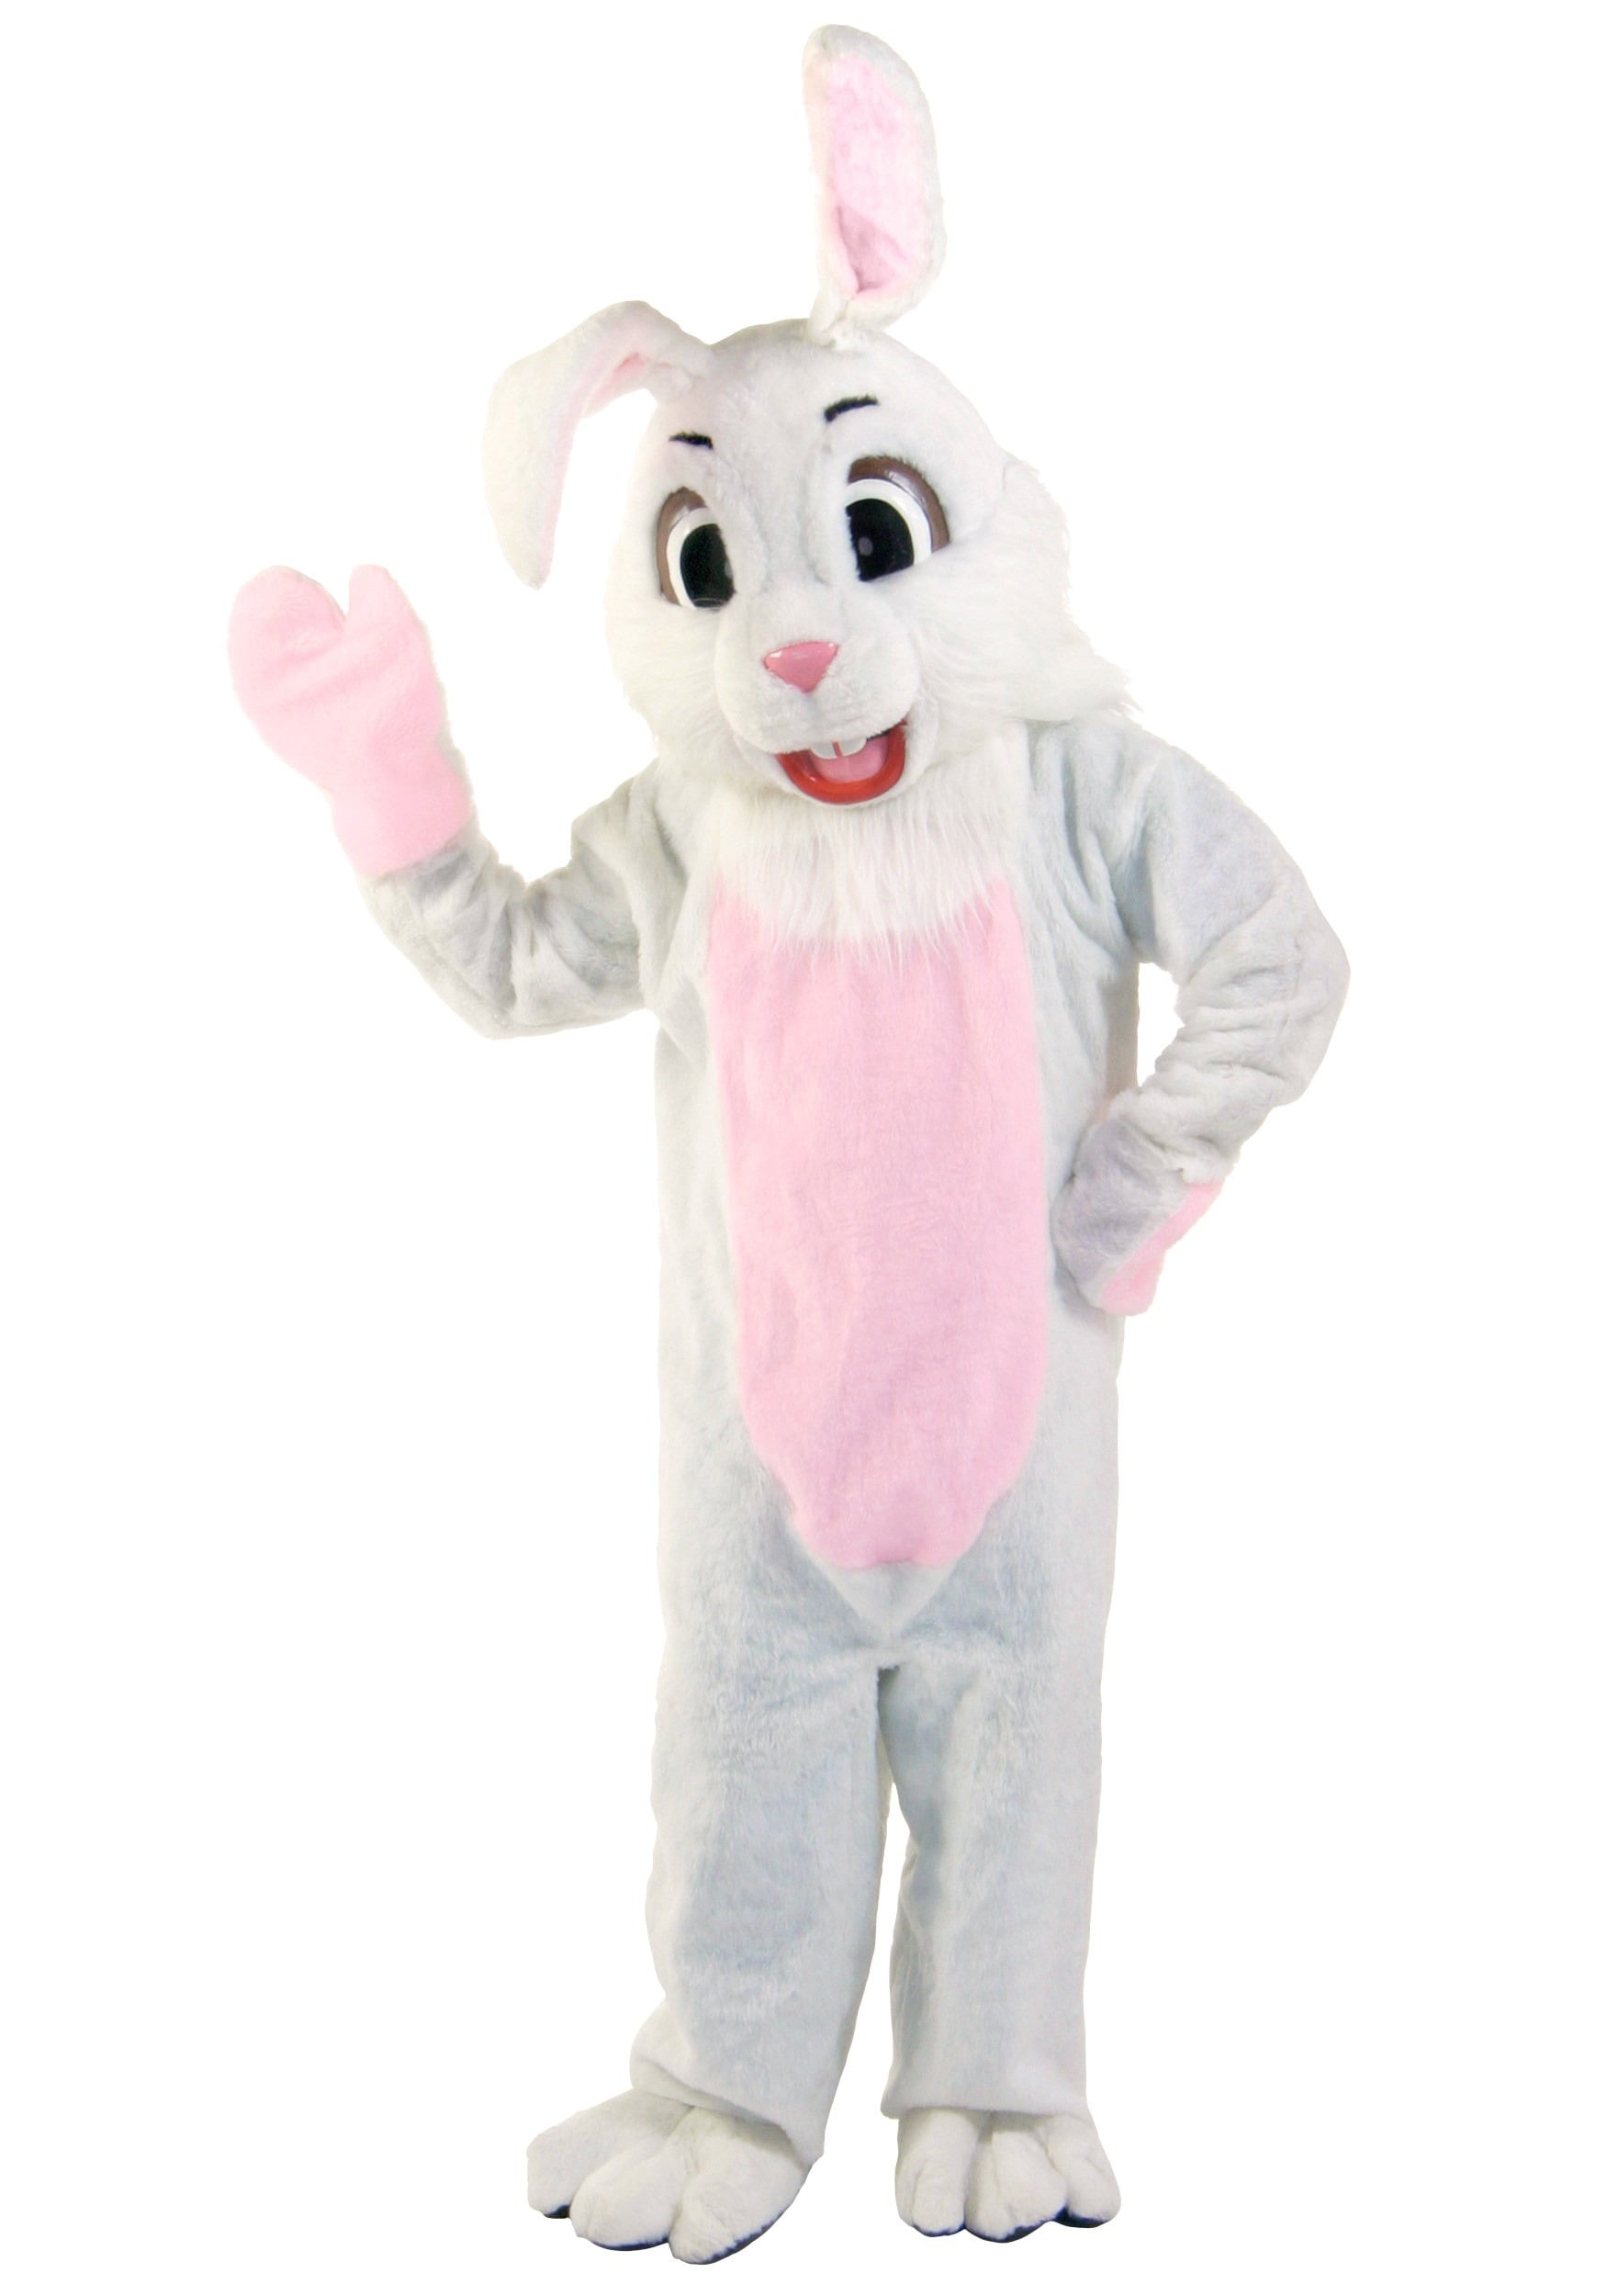 Hot Easter Bunny Mascot Costume Cartoon Rabbit Cosplay Adult Fancy Dress Outfit 